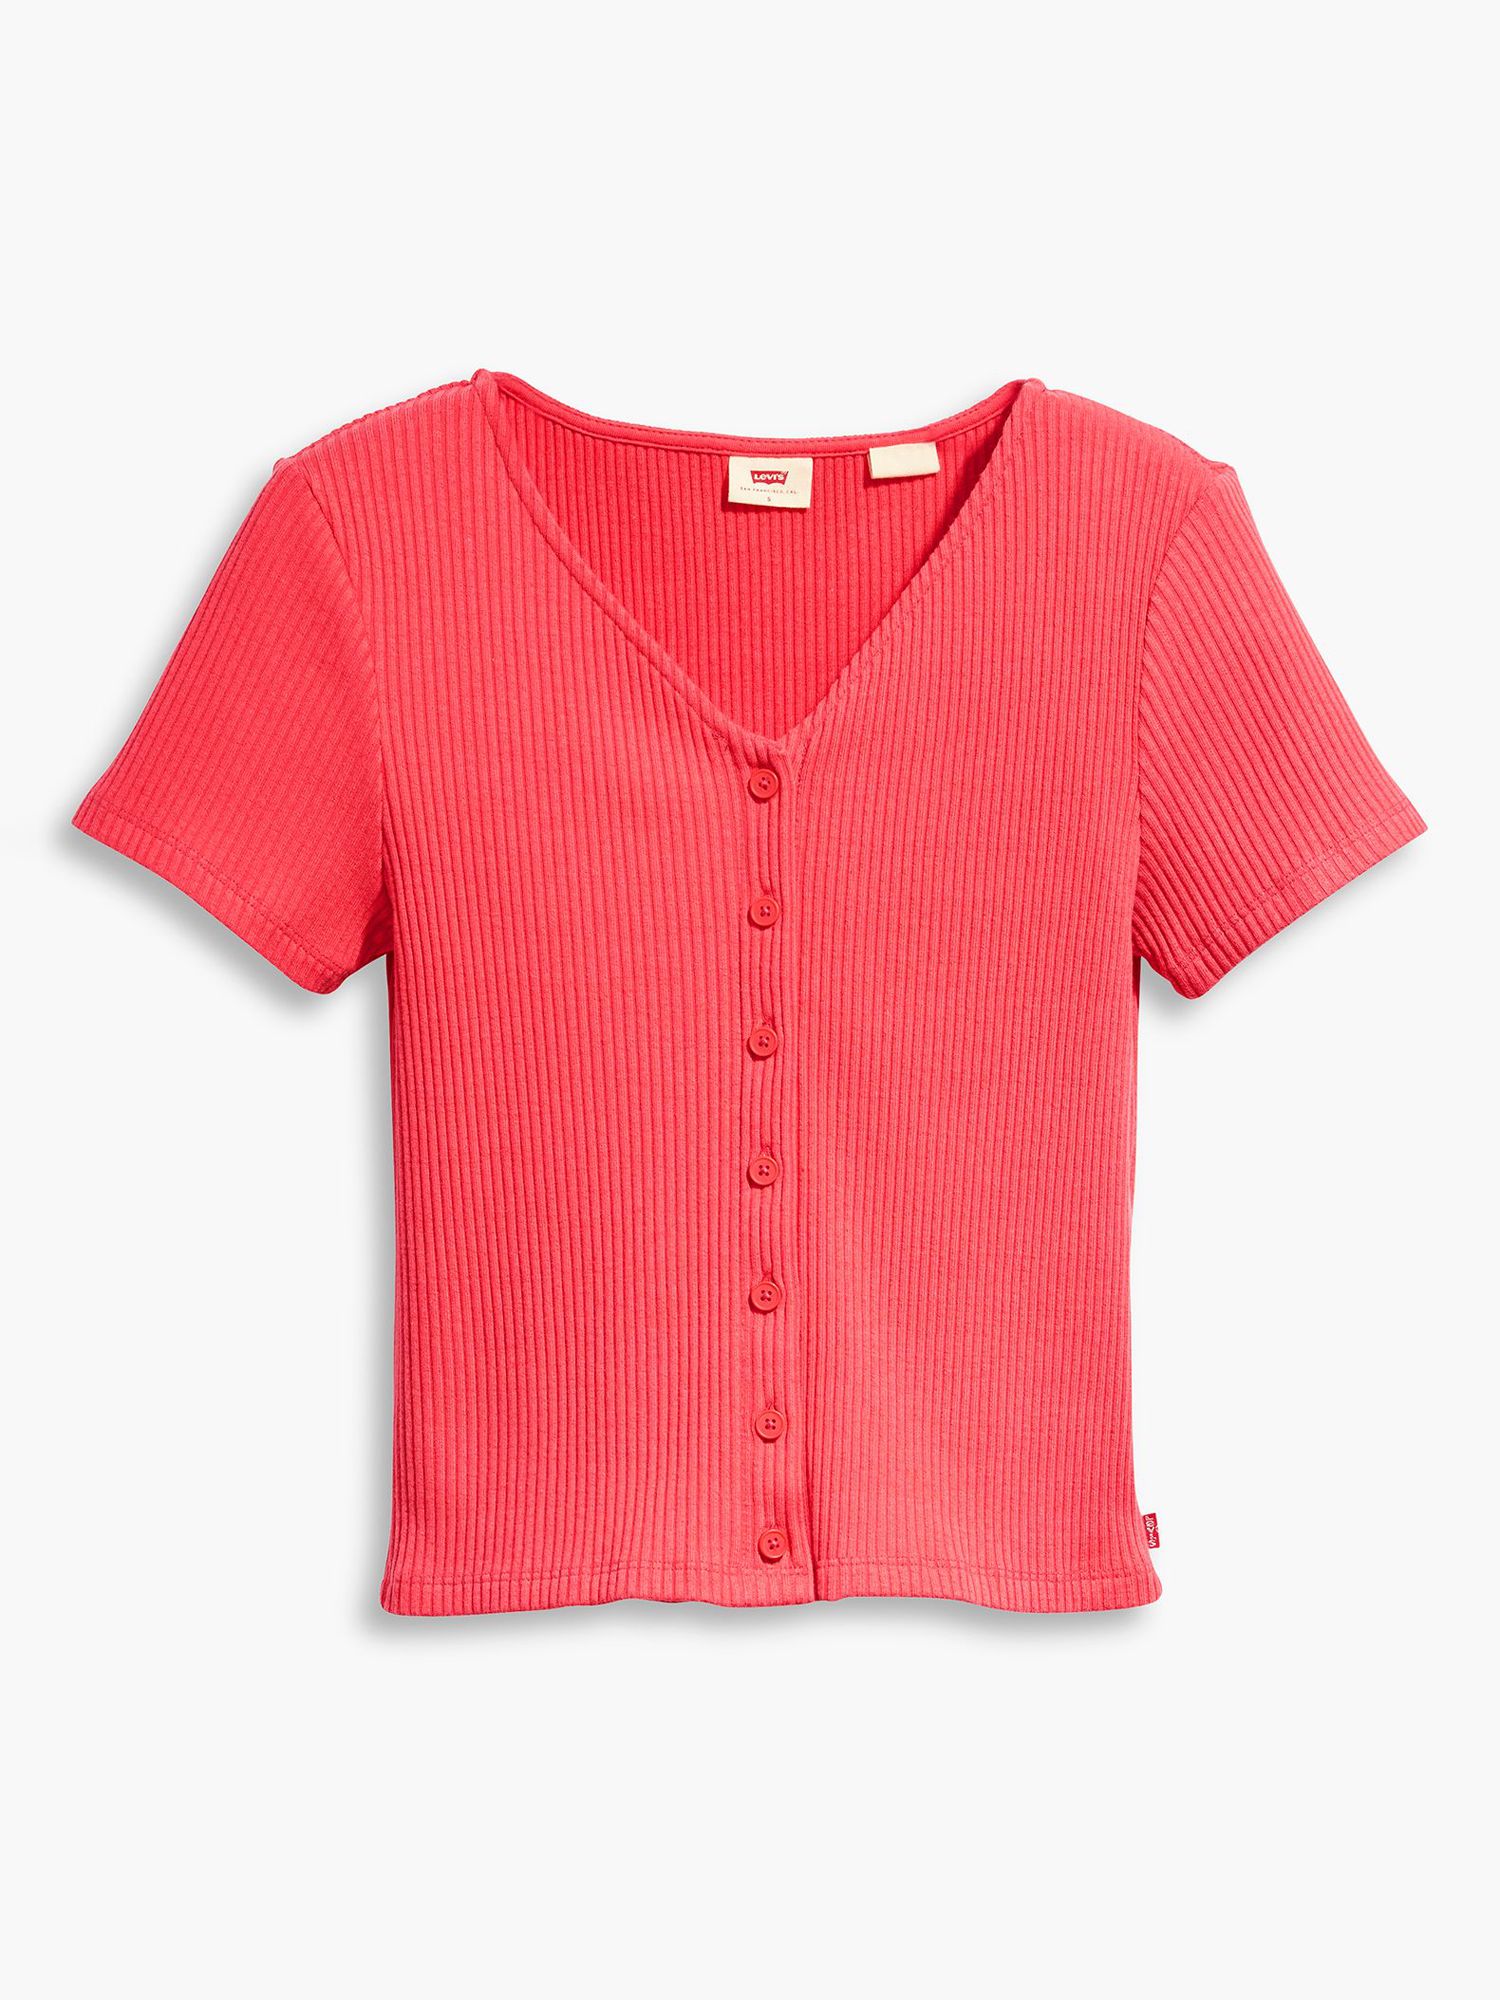 Levi's Monica Button Front Short Sleeve Top, Coral Red, XS